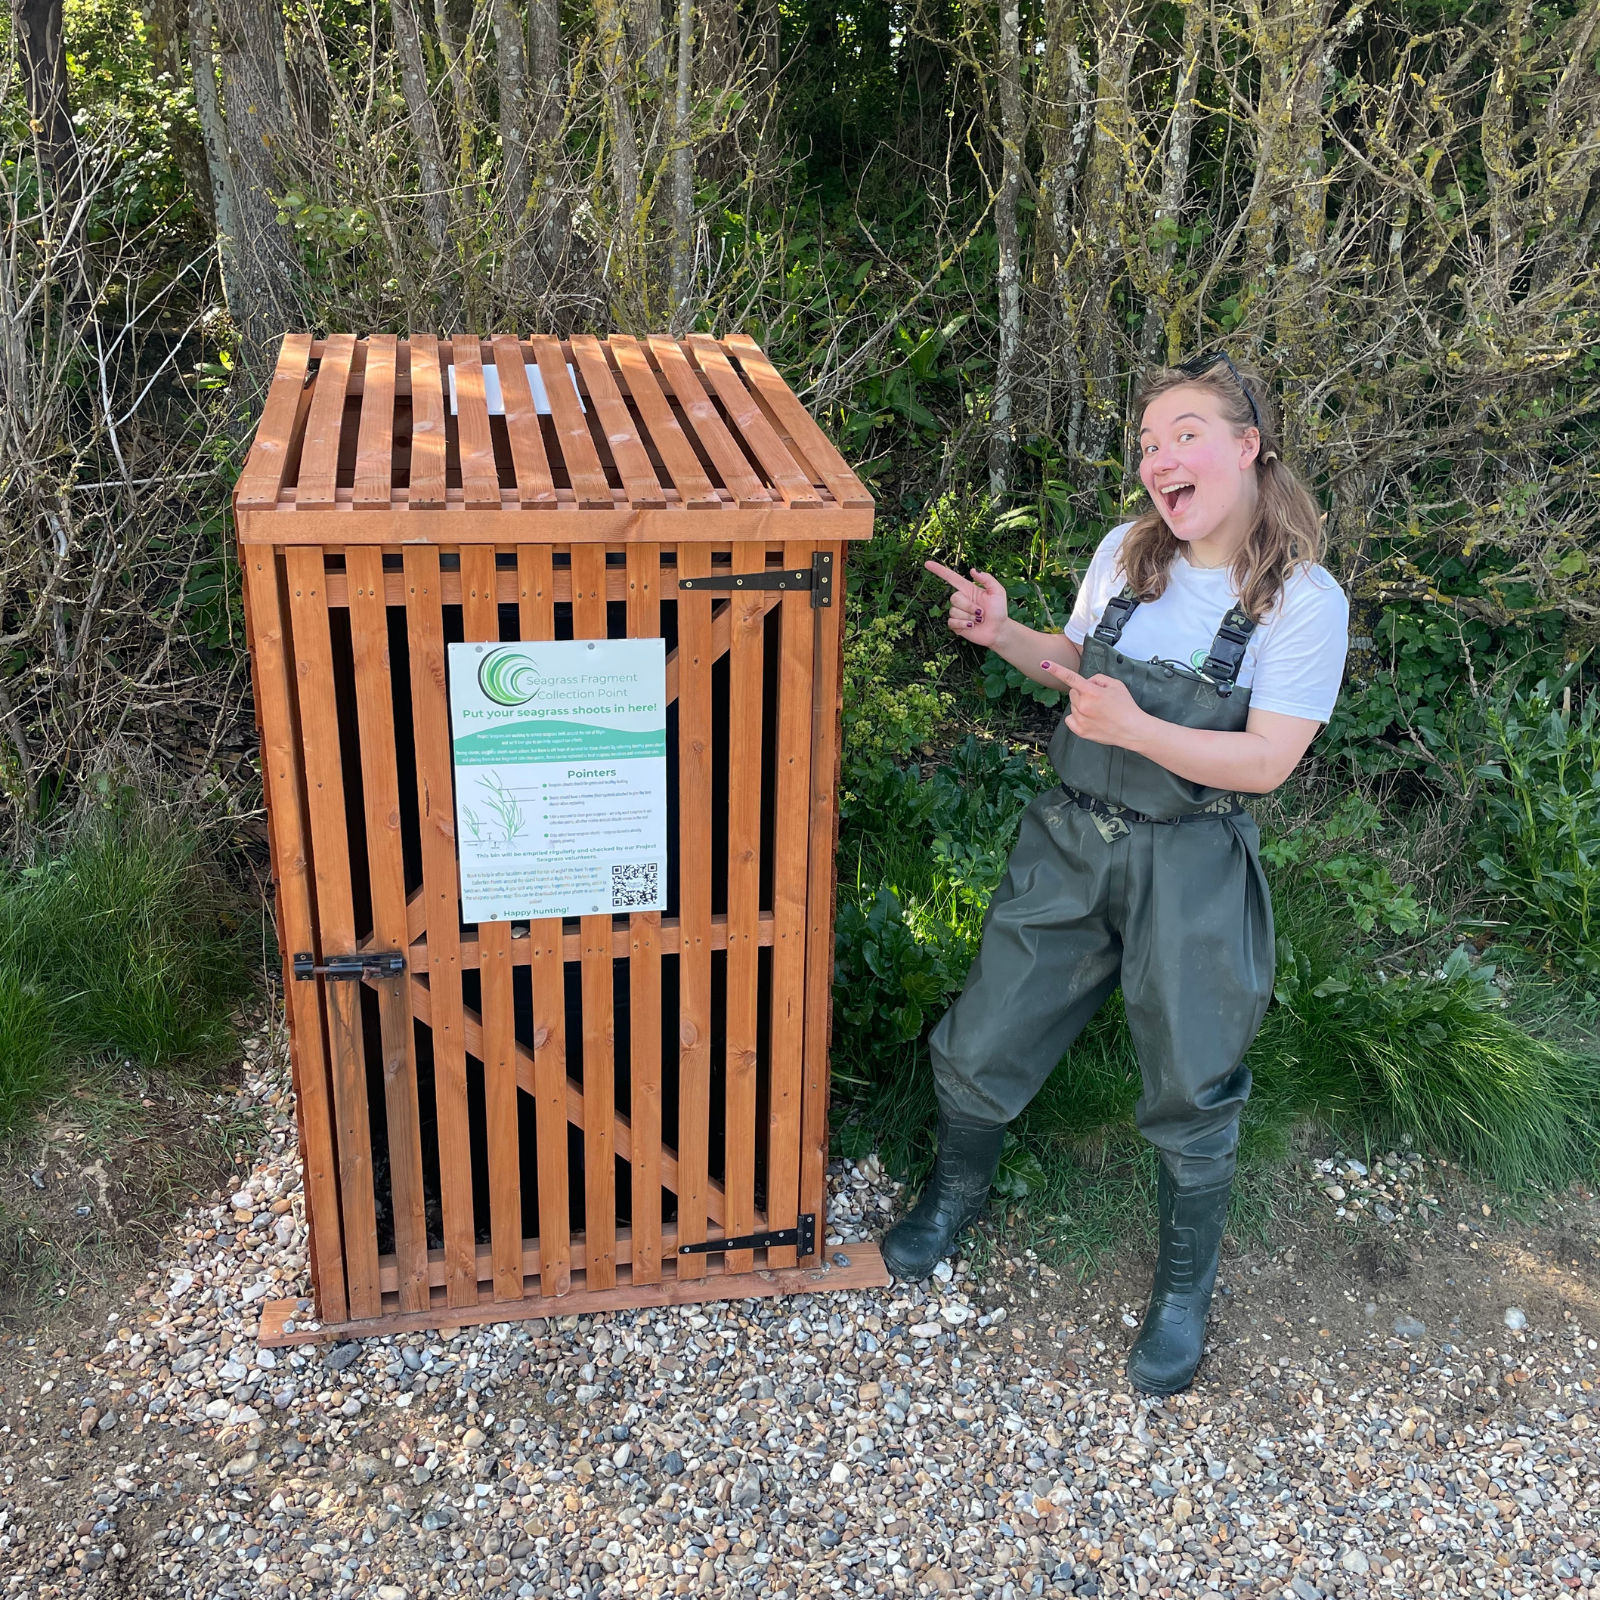 Becky is wearing waders and standing pointing at a seagrass fragment bin